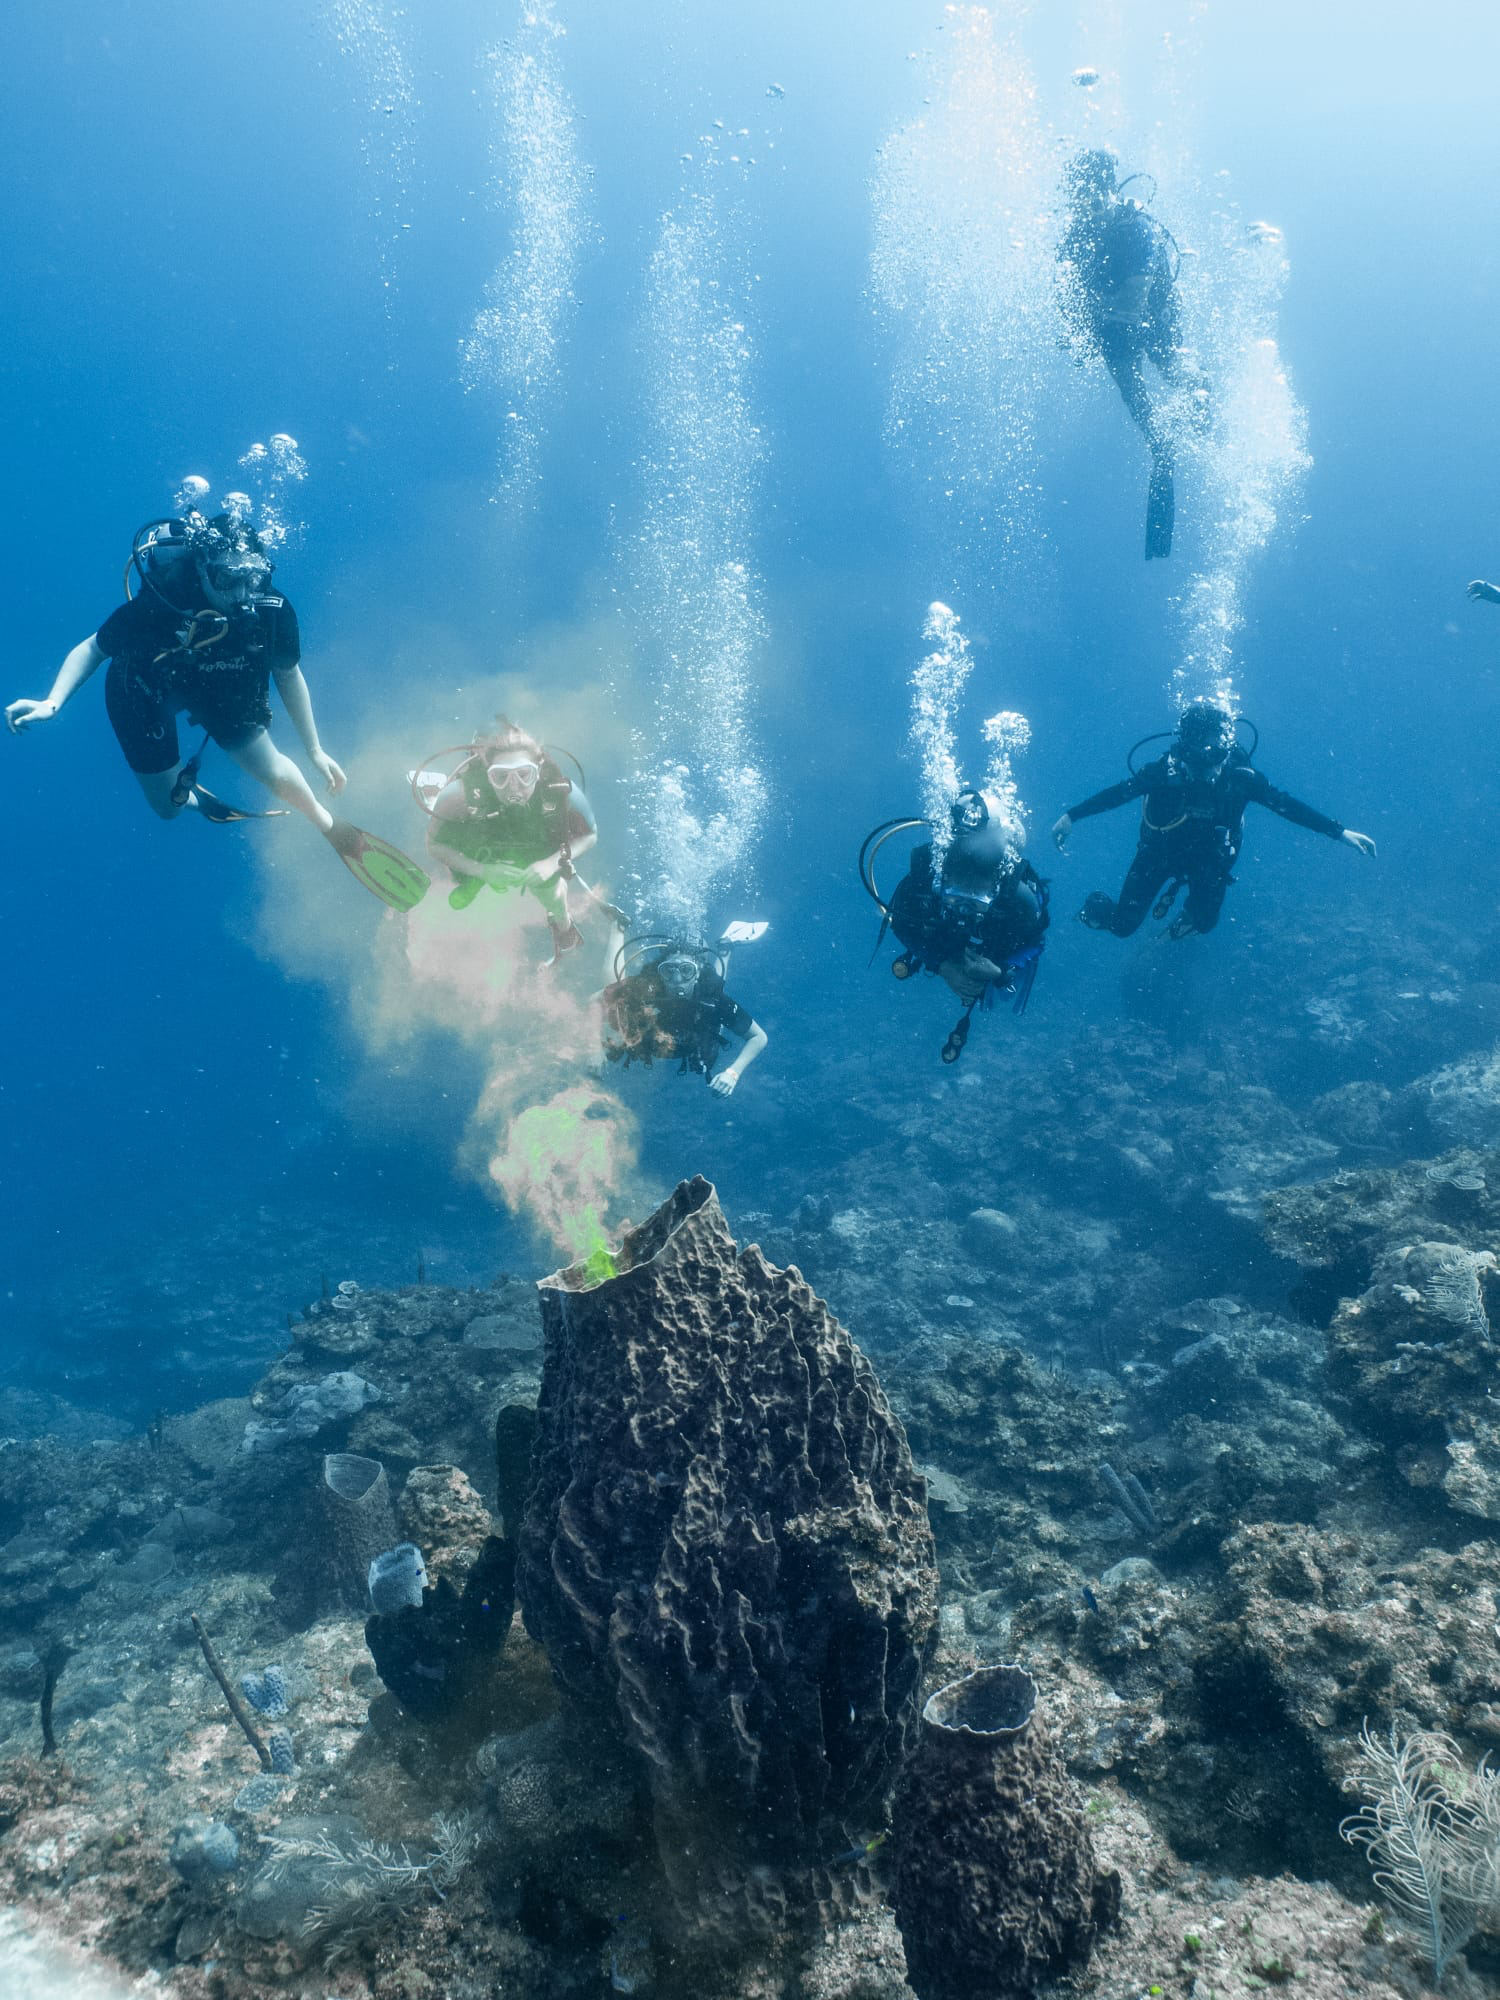 Iowa State students conducted research through both scuba diving and snorkeling during their Caribbean marine biology field course.